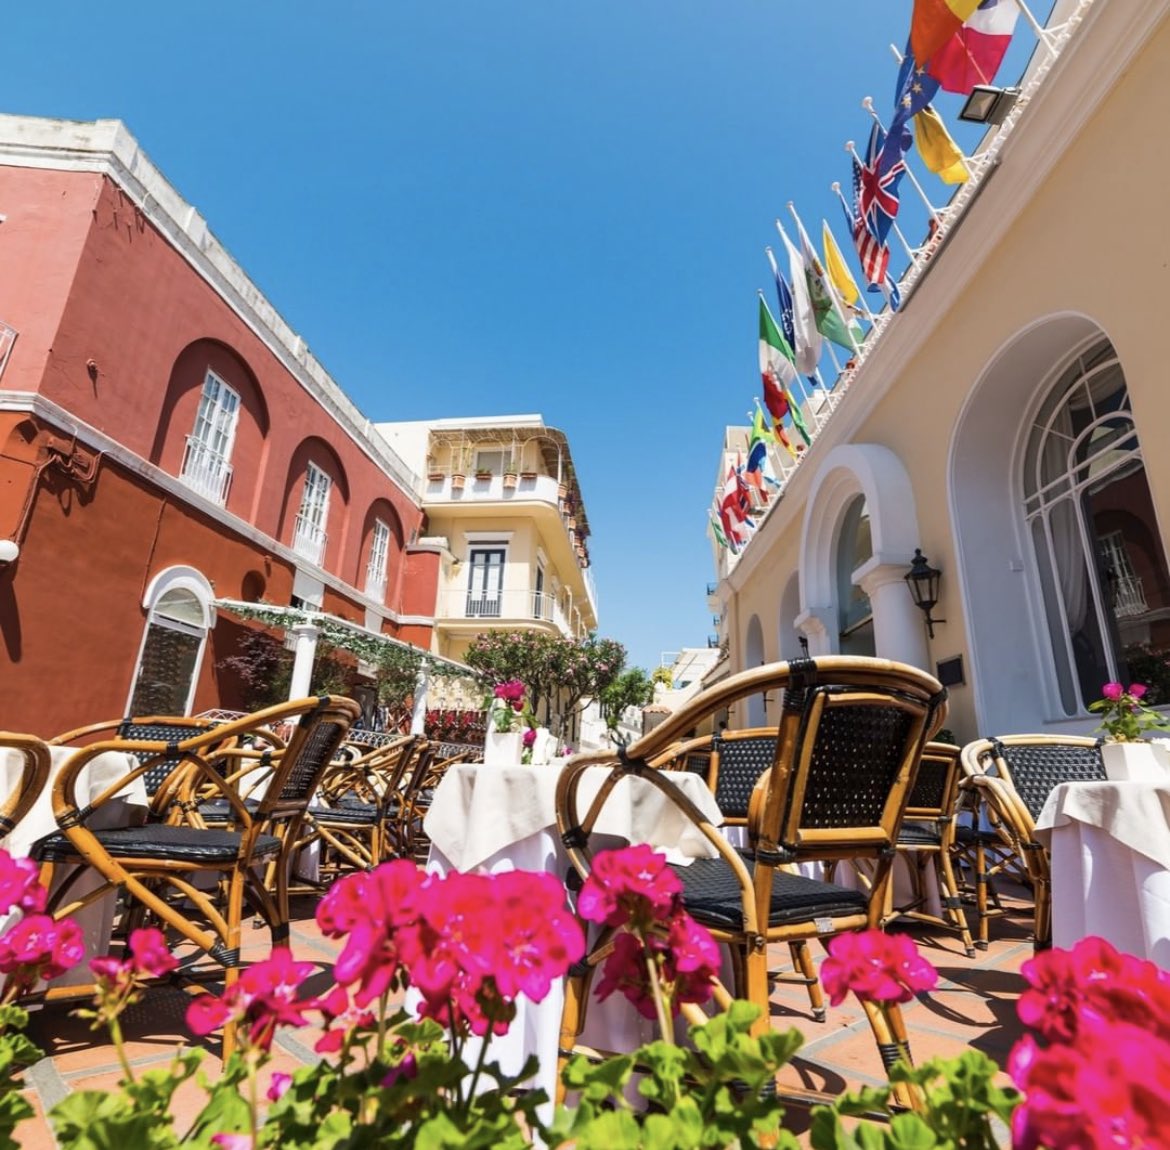 VISUALIZE yourself here! You are having coffee in this beautiful picturesque square in Capri Italy. Now take action! Connect with us and reserve your spot today! Italy for $178 USD a day is unheard of.
#travel #travelitaly #healthyhabits #soberlife #sobertravel #alcoholfreetravel